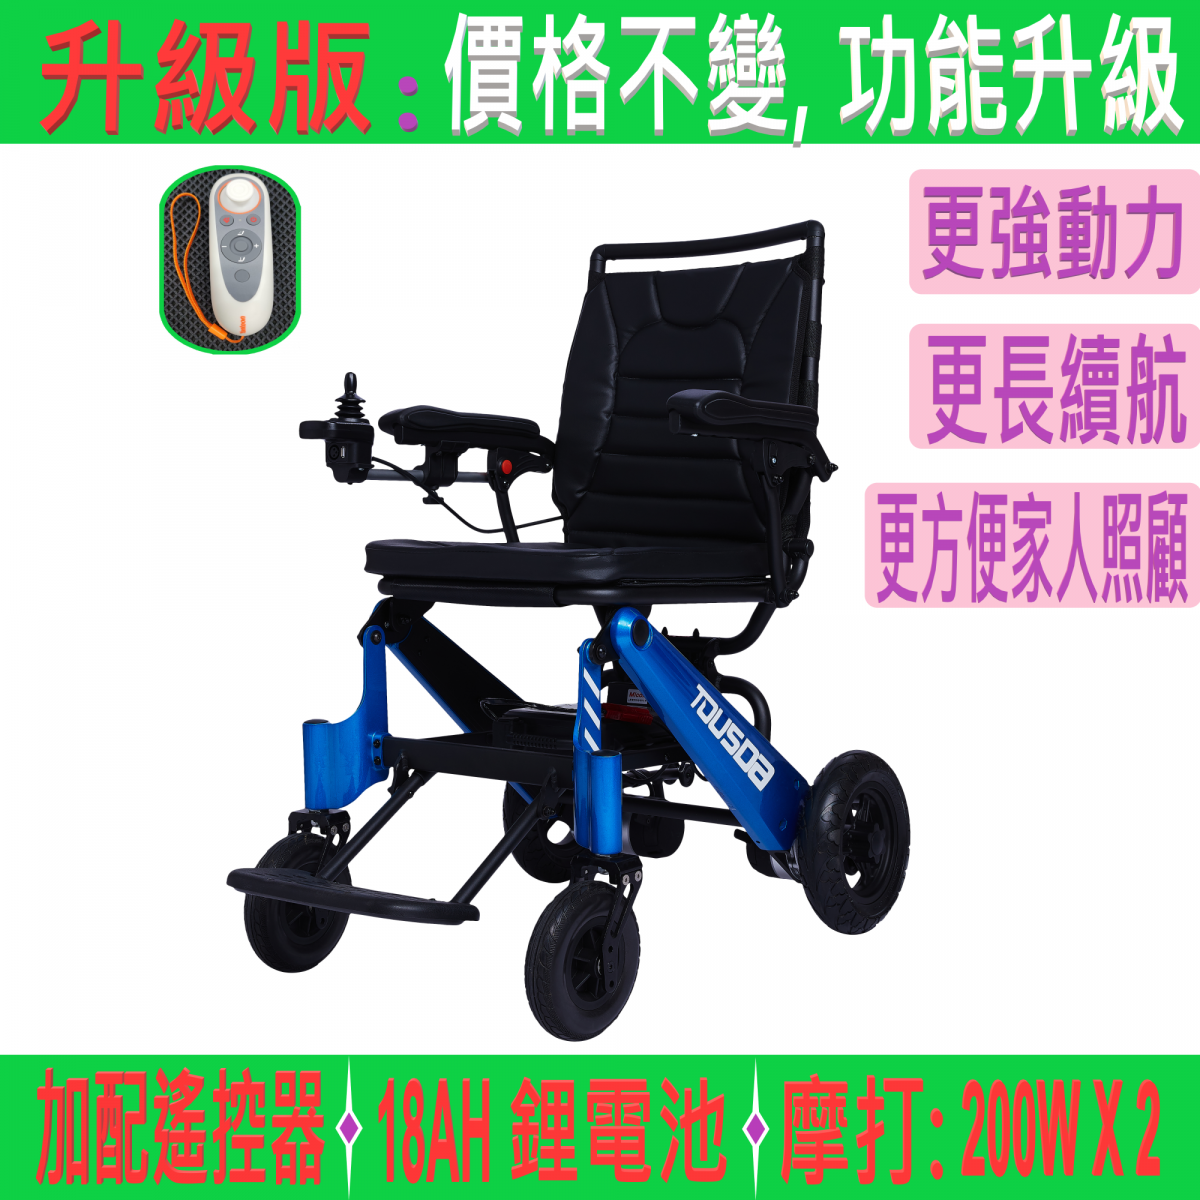 TOUSDA - 18A Lithium Battery 22kg Lightweight Electric Wheelchair with Remote Control